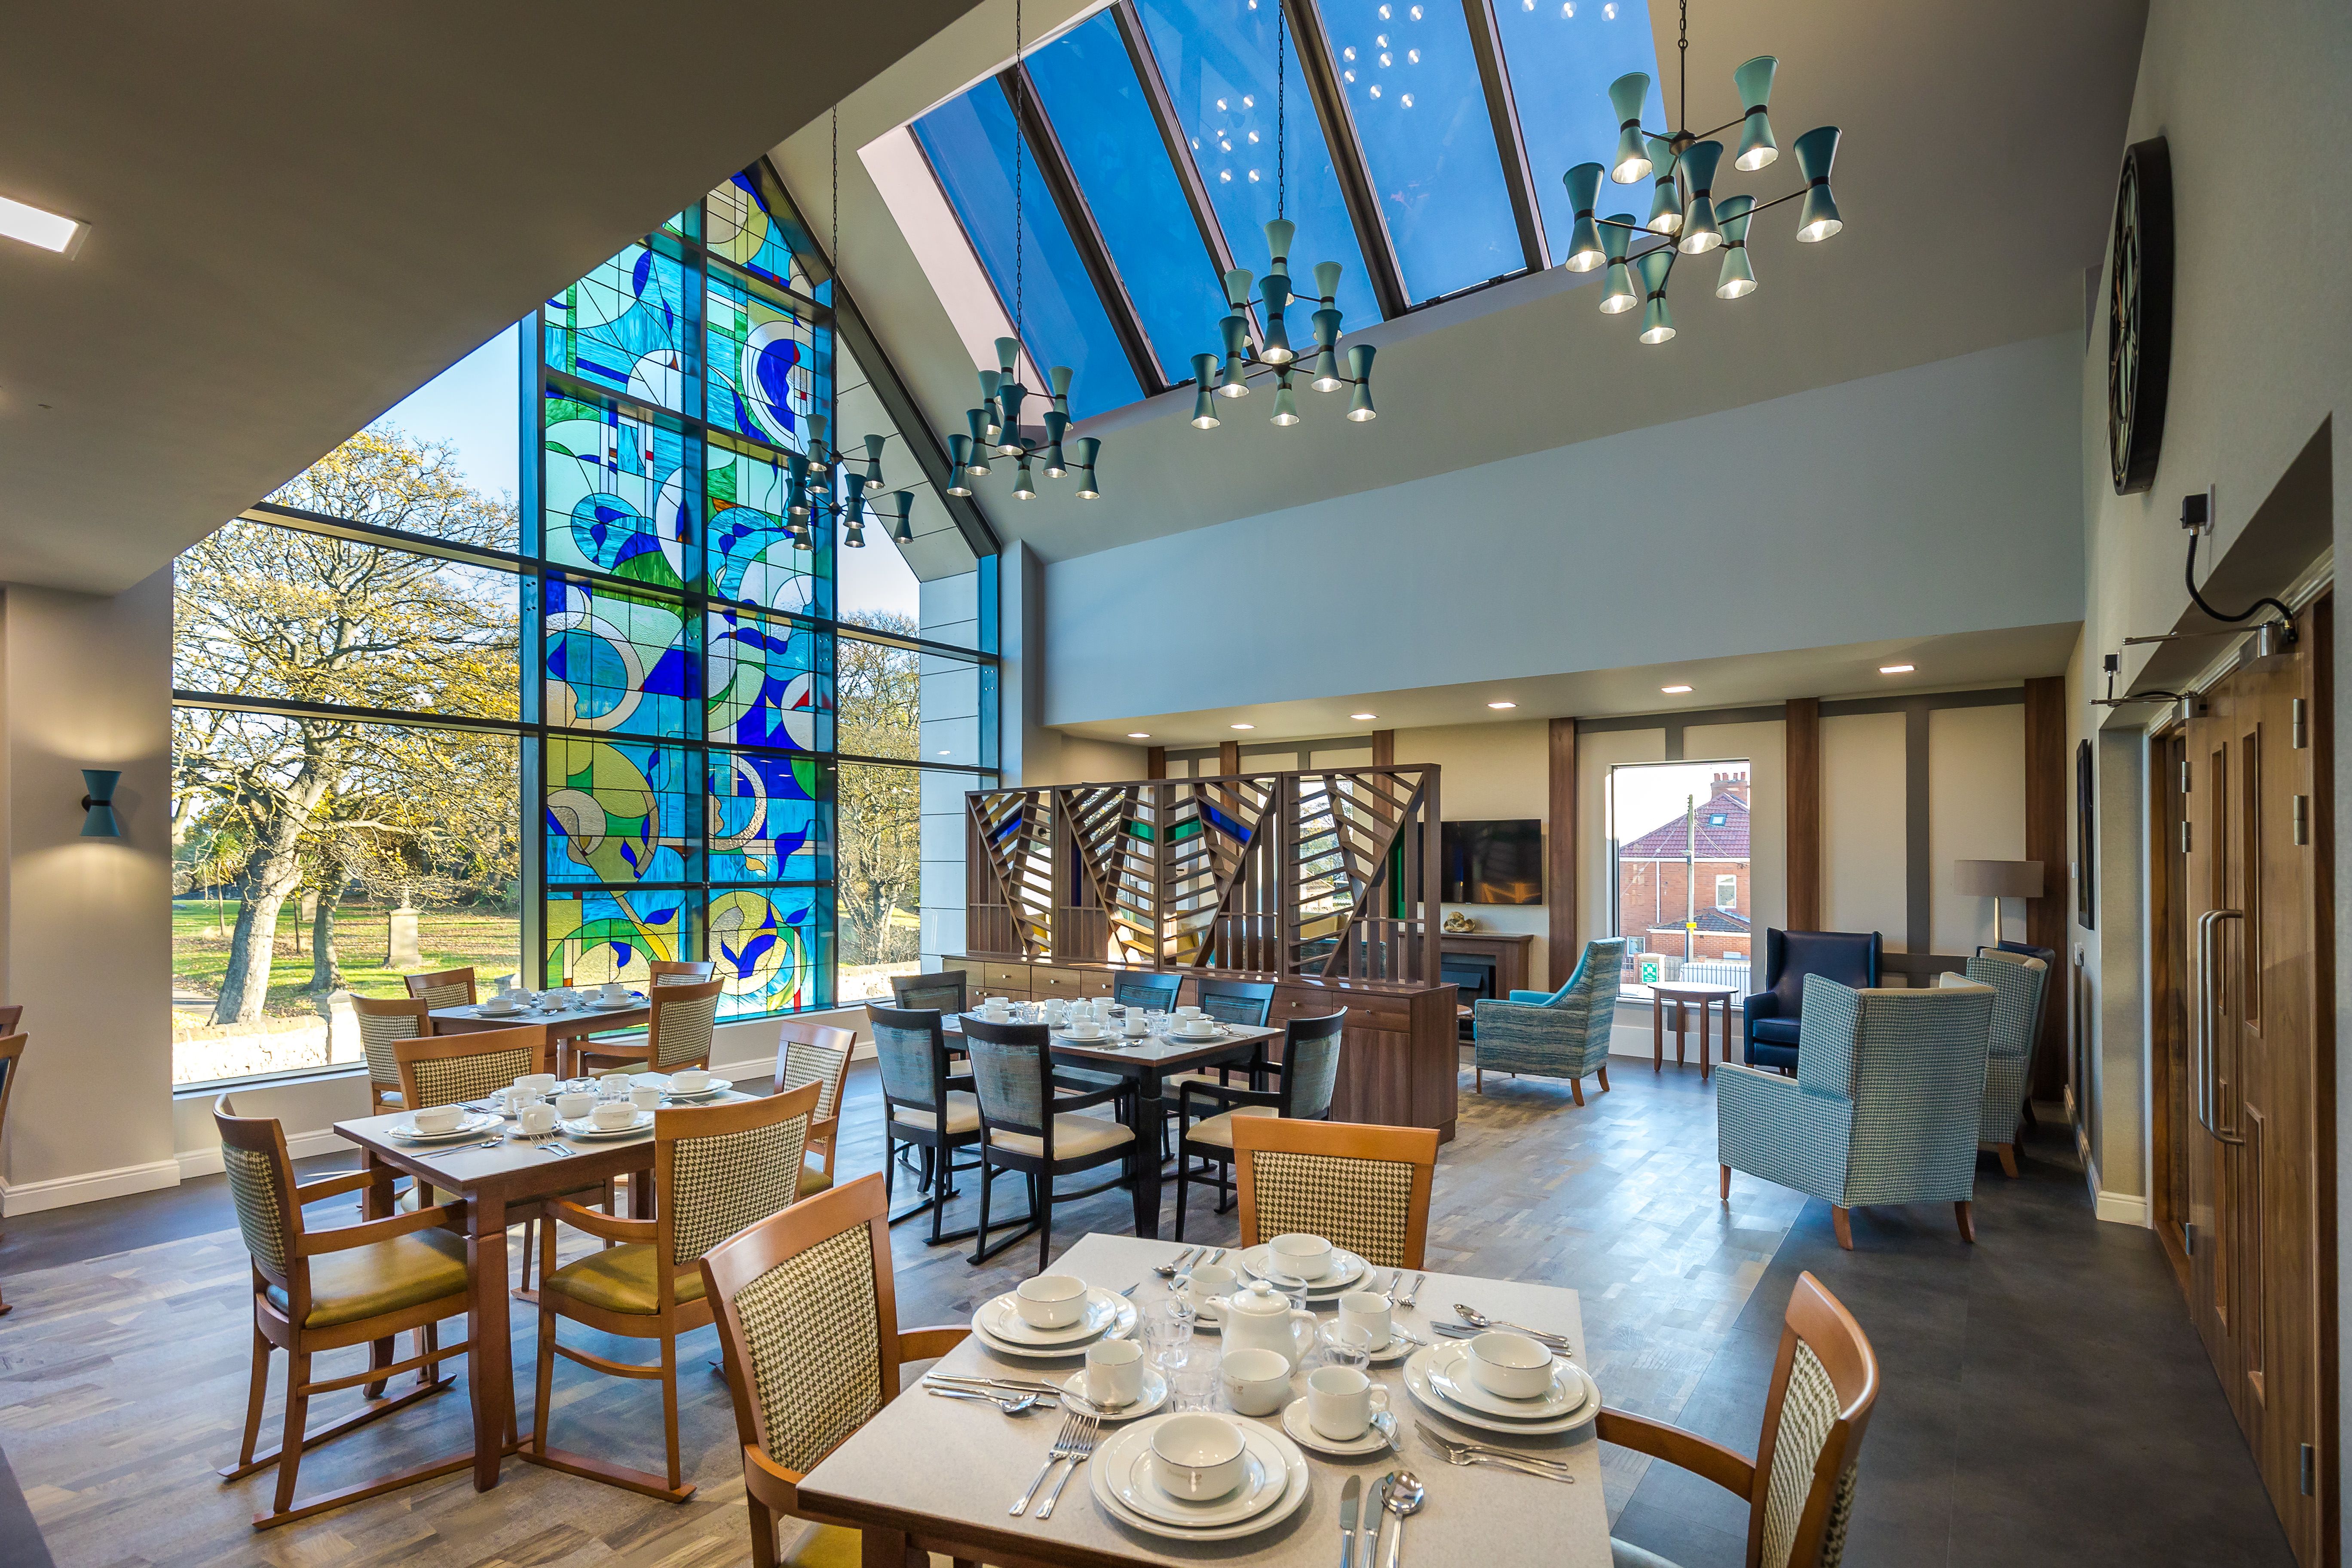 View of Bede House dining room with feature stained glass window